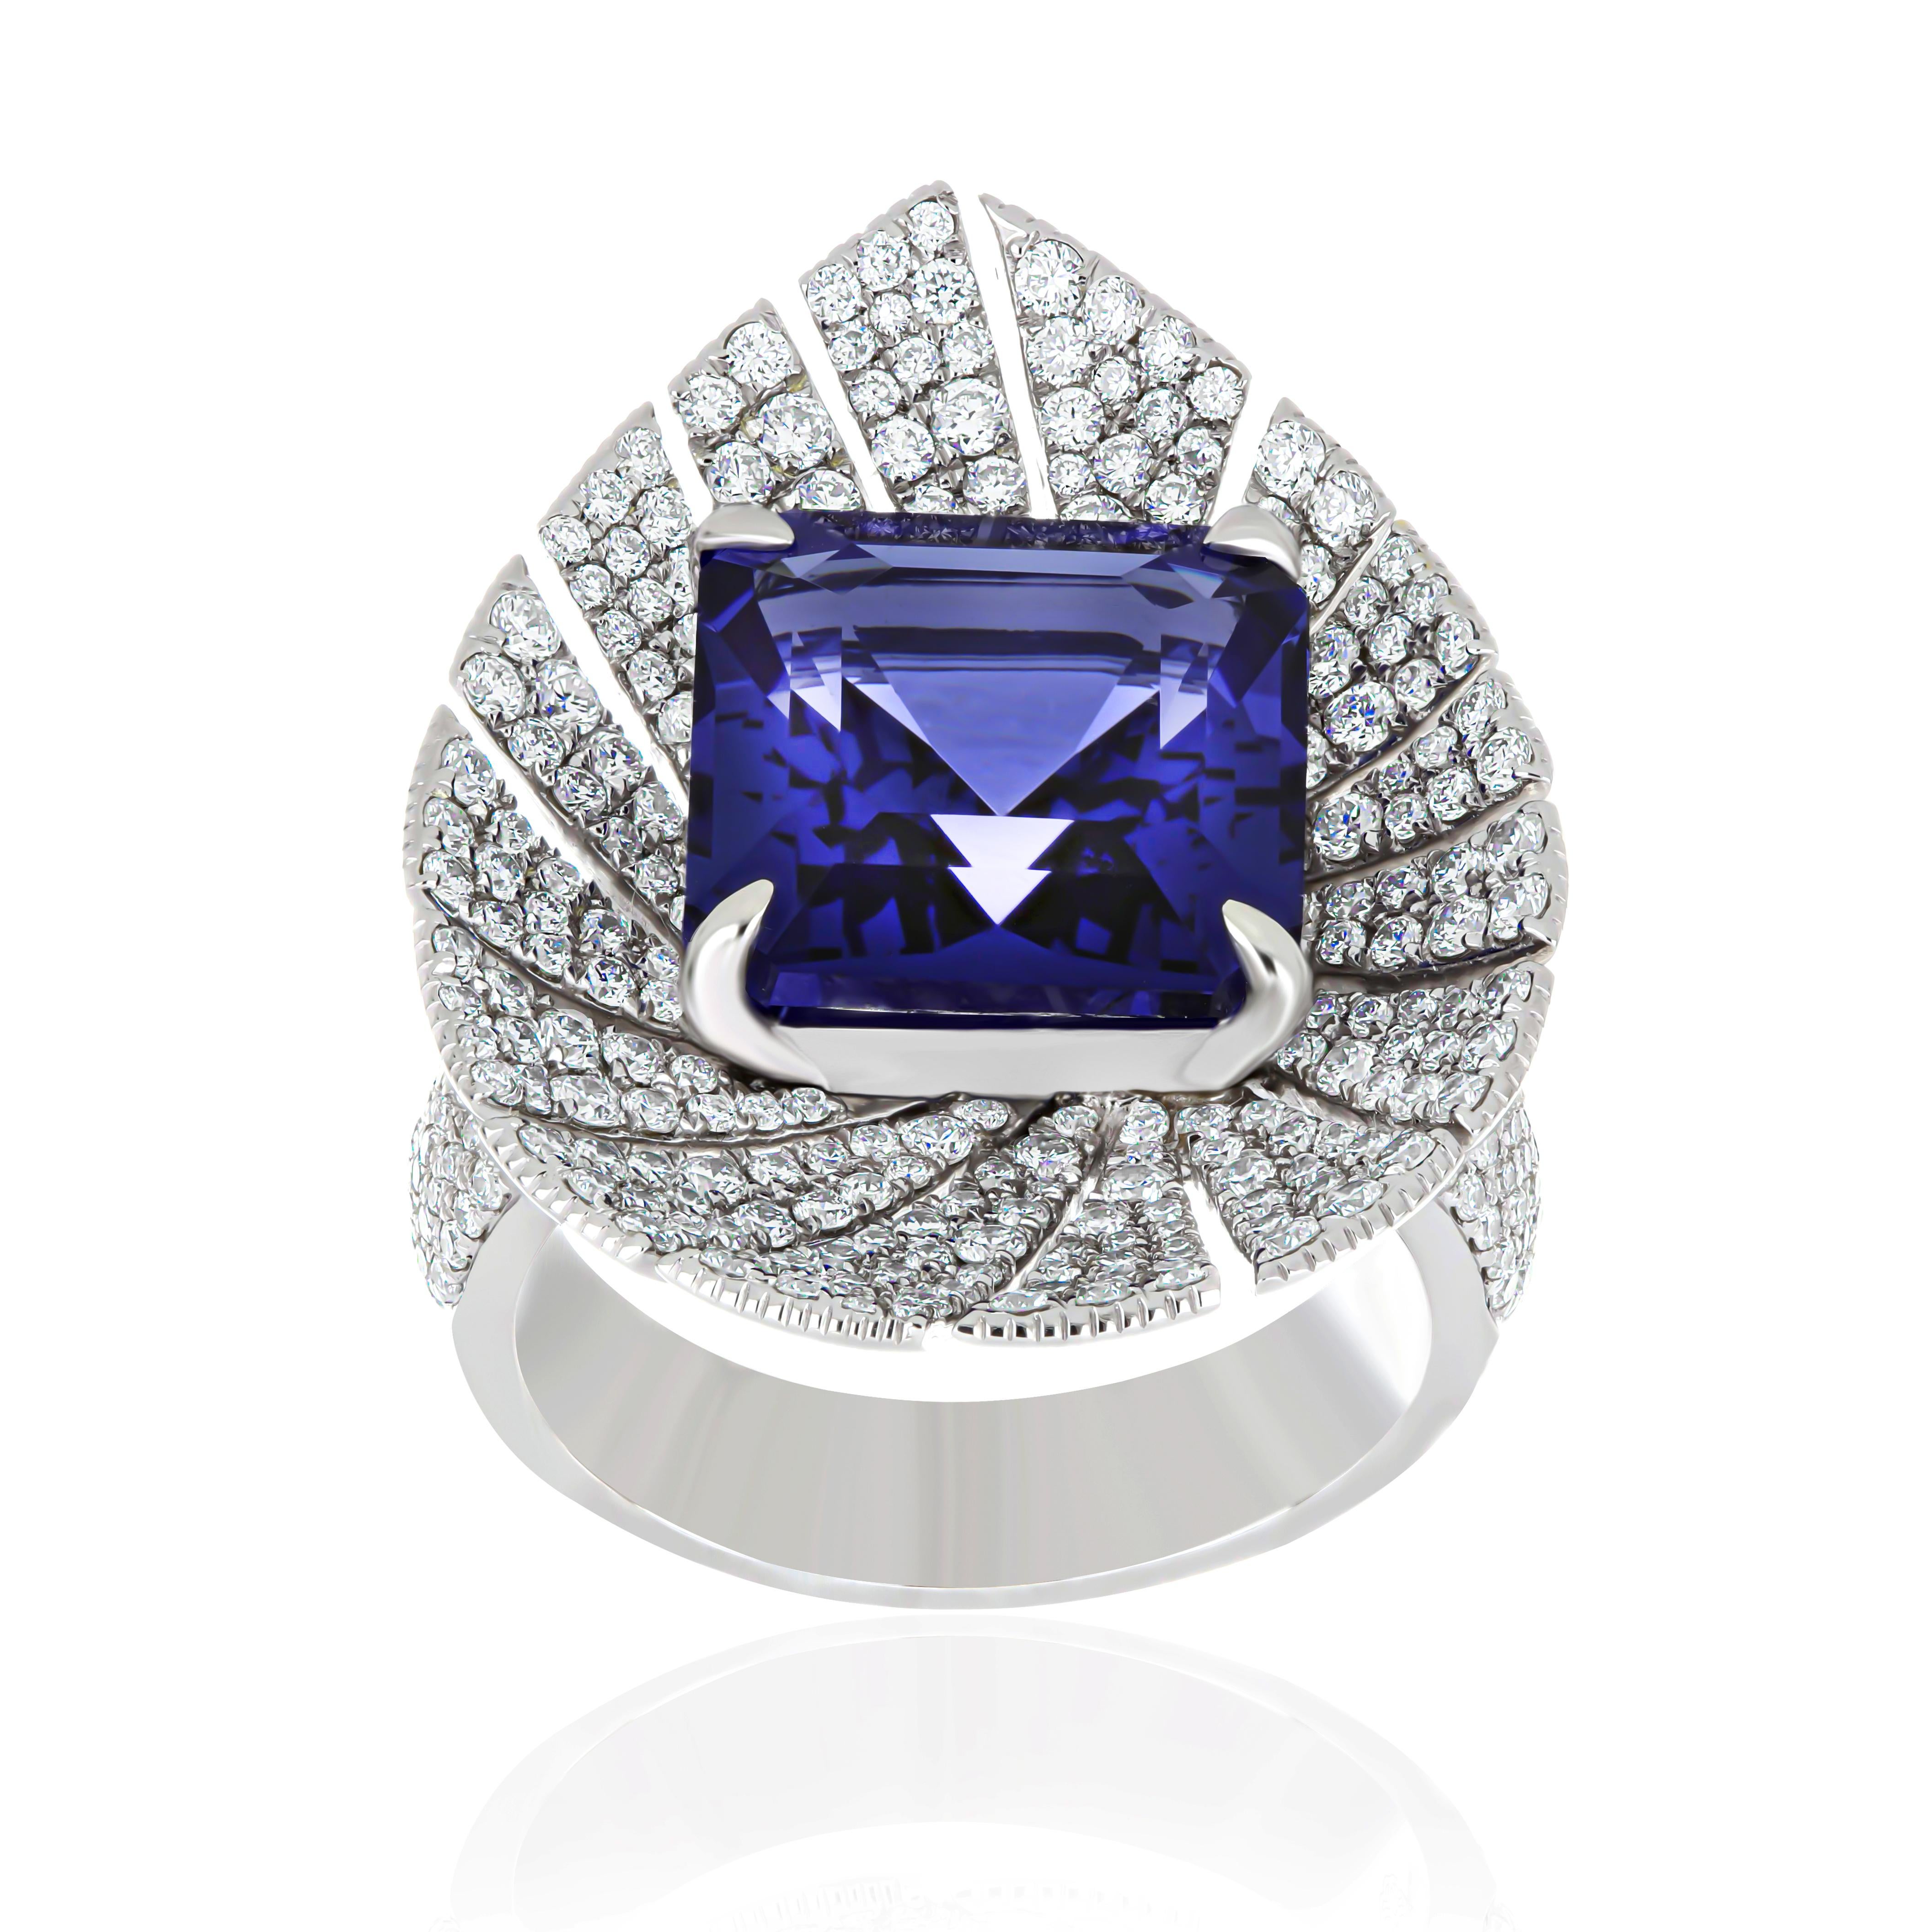 Elegant and Exquisitely detailed White Gold Ring, with a rare 9.1 Cts (approx.) Octagon Shape Cut Tanzanite set in the center beautifully accented with Micro pave set Diamonds, weighing approx. 2.1  CT's (approx.) total carat weight to further